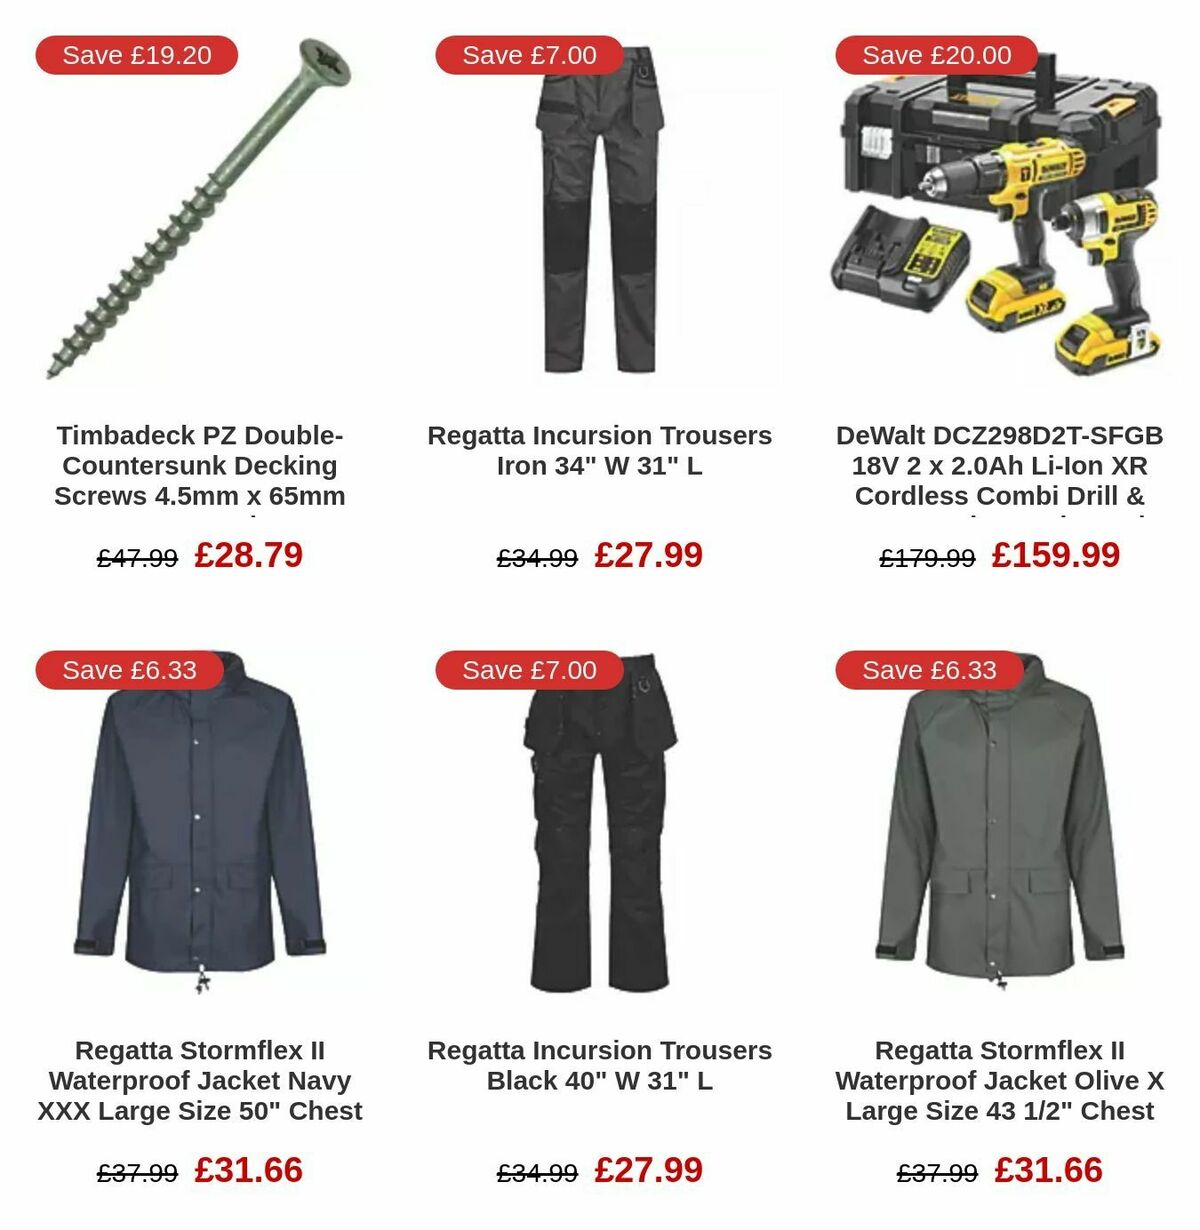 Screwfix Bank Holiday Offers from 21 August